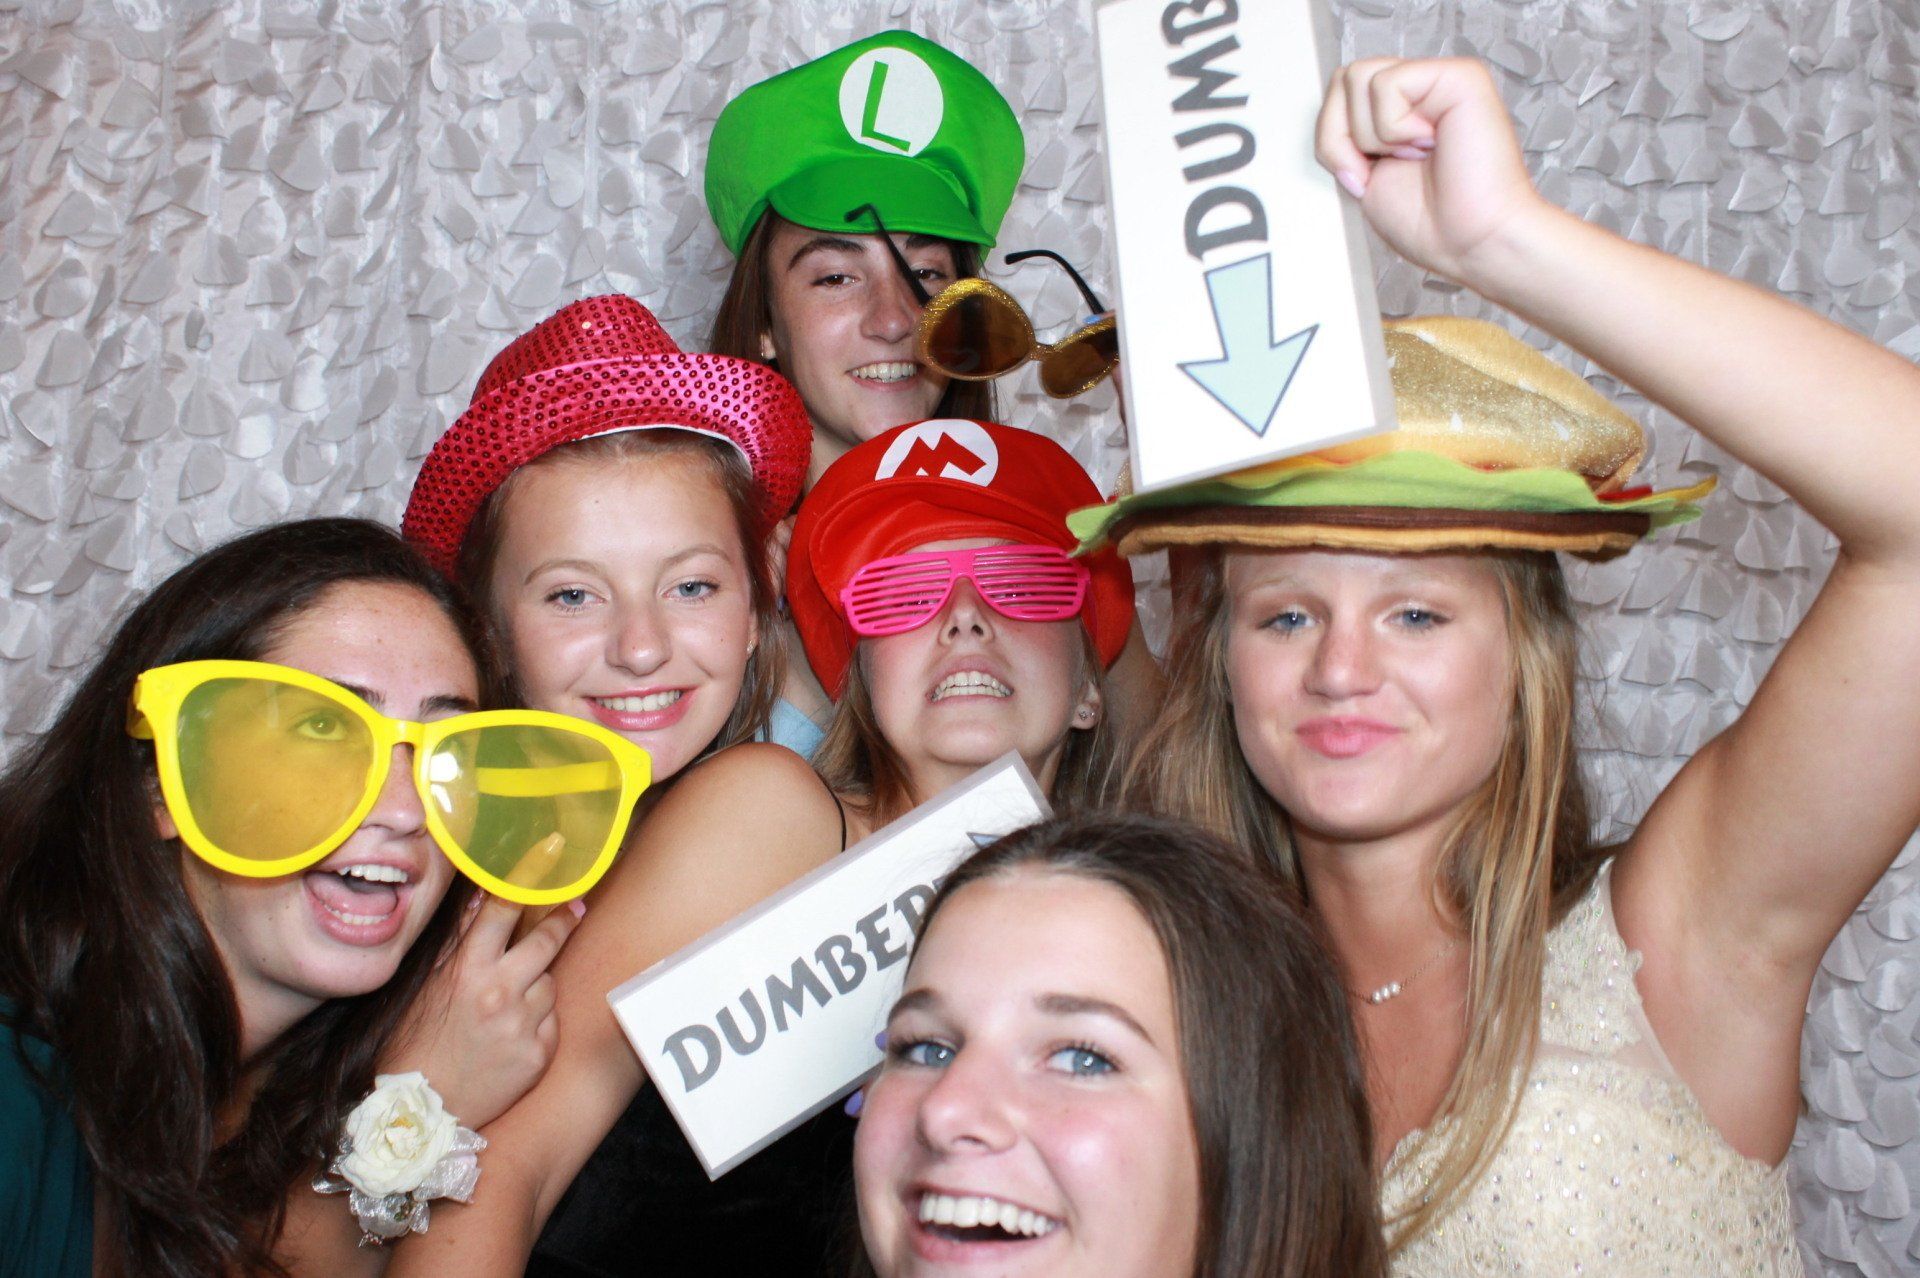 photo booth rental maine at Regatta Room Banquet & Conference Center, Eliot, Maine